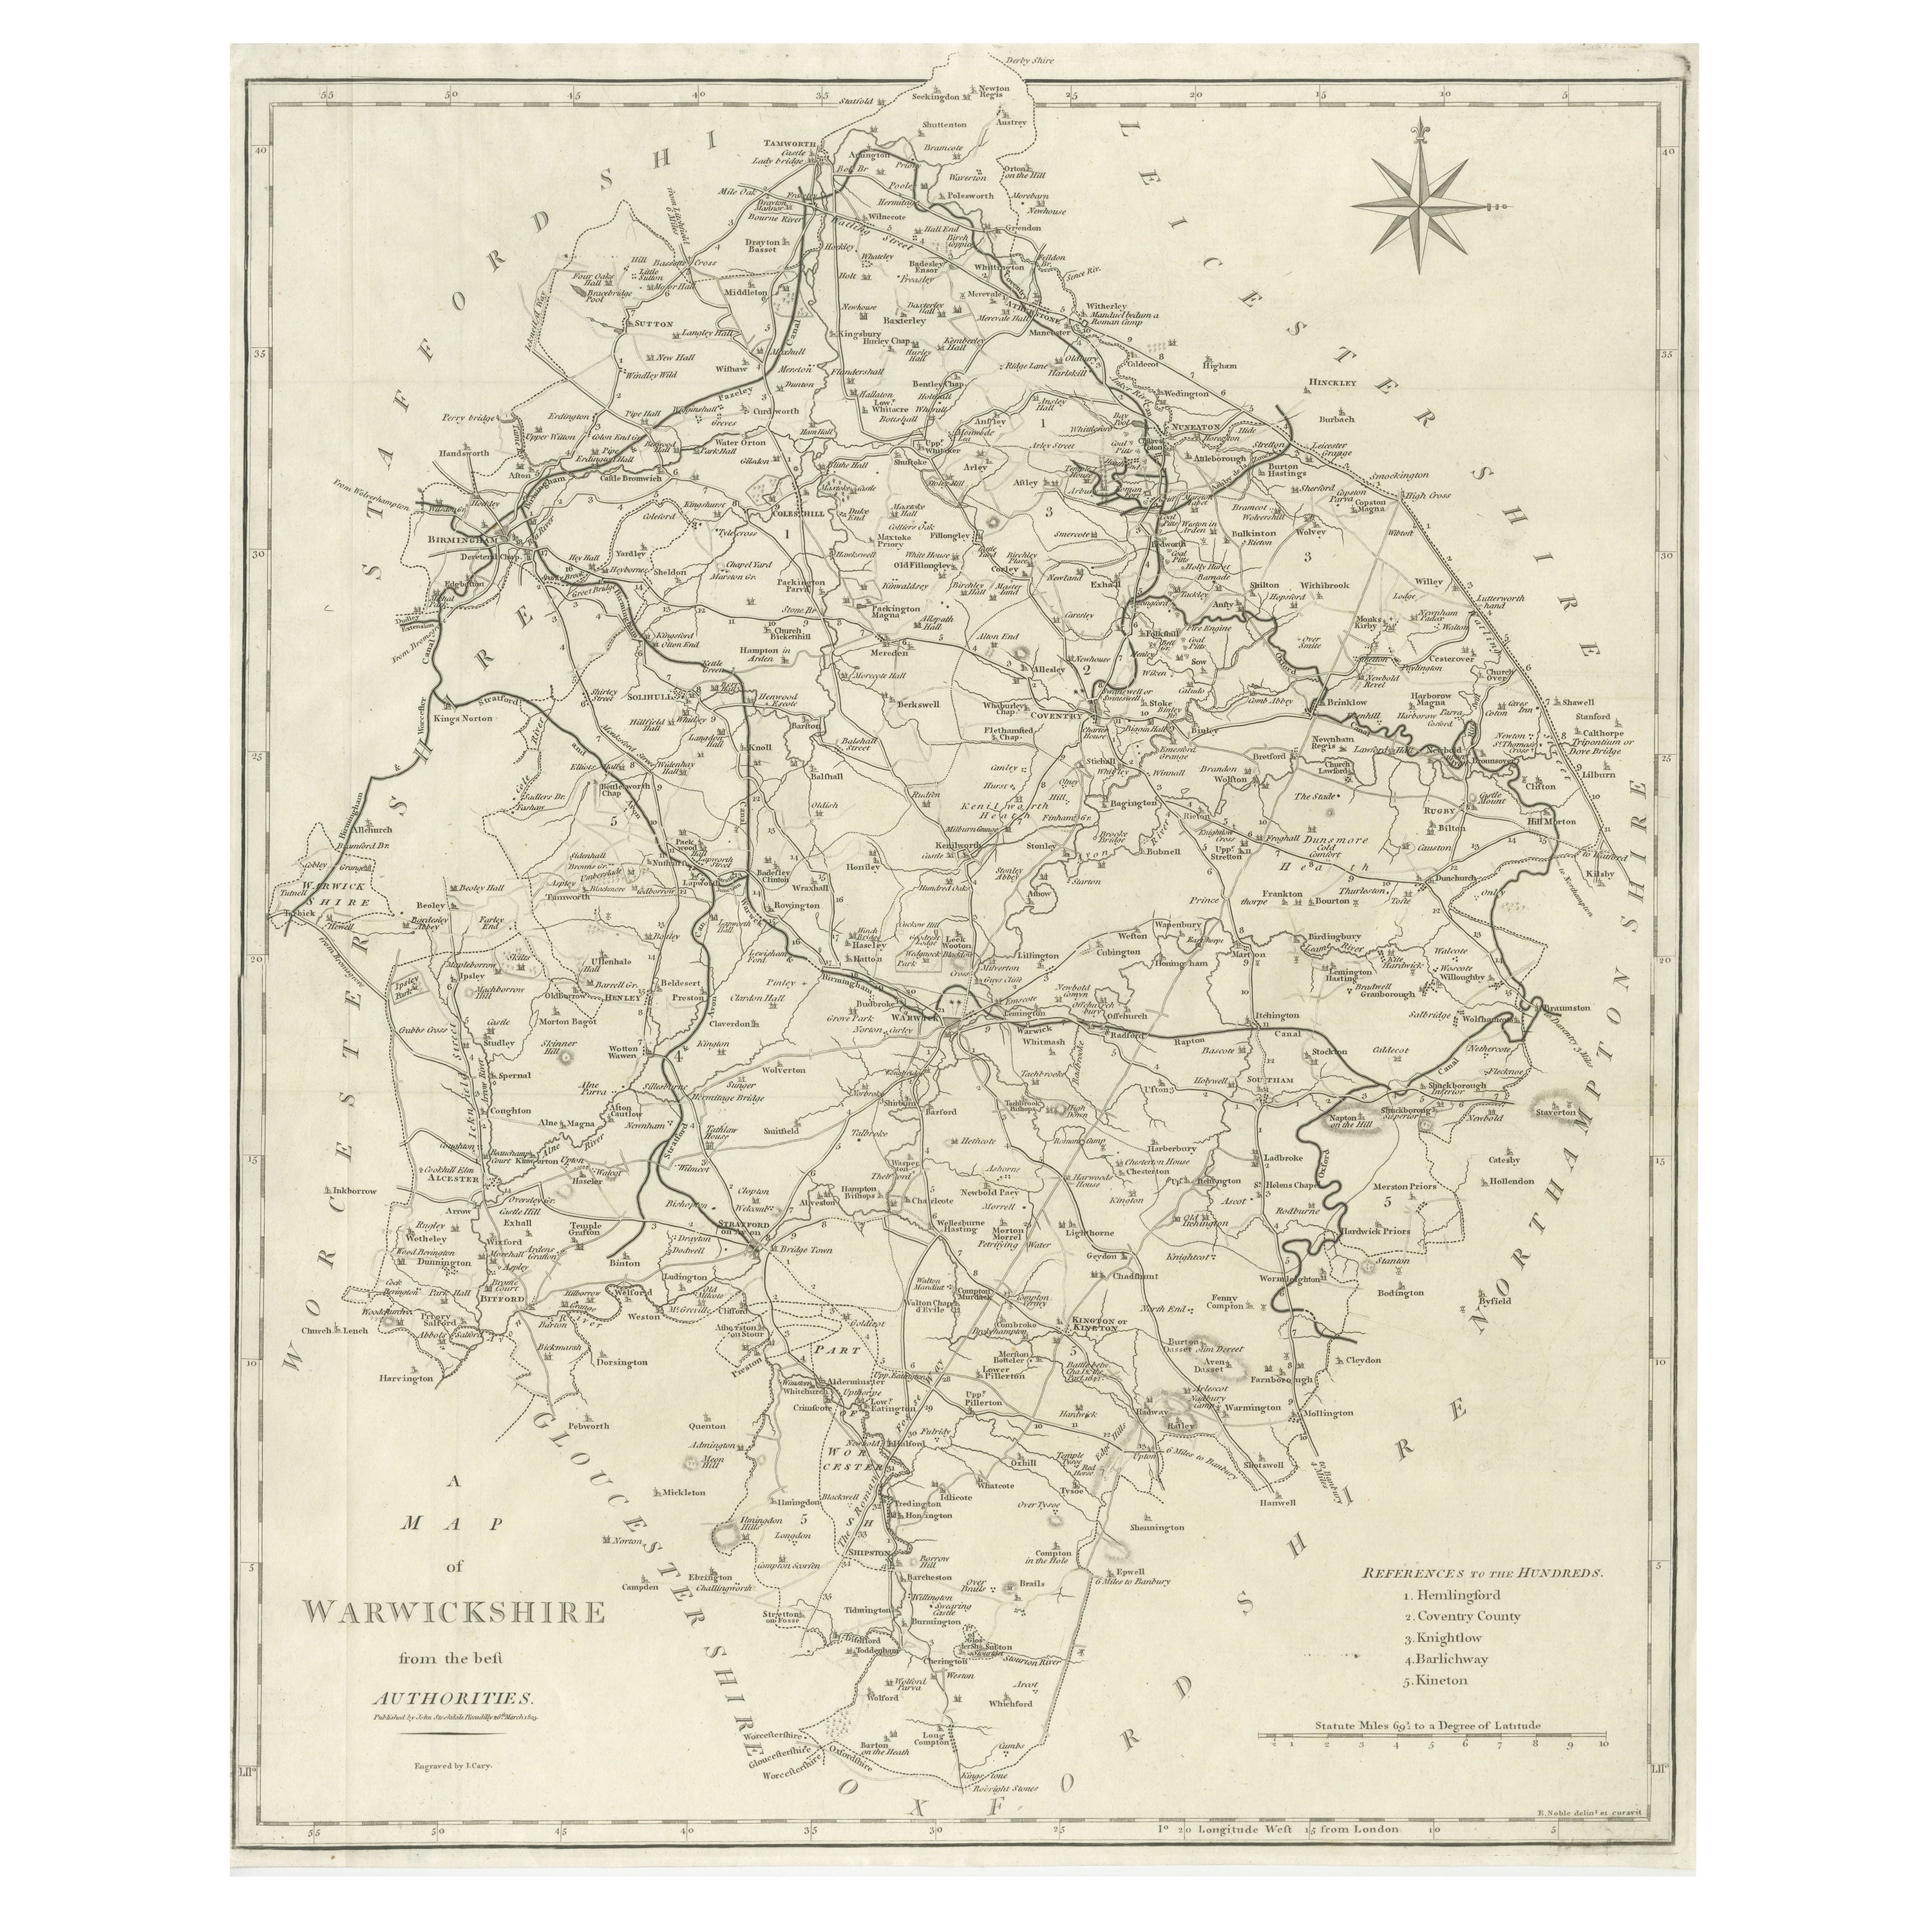 Large Antique County Map of Warwickshire, England